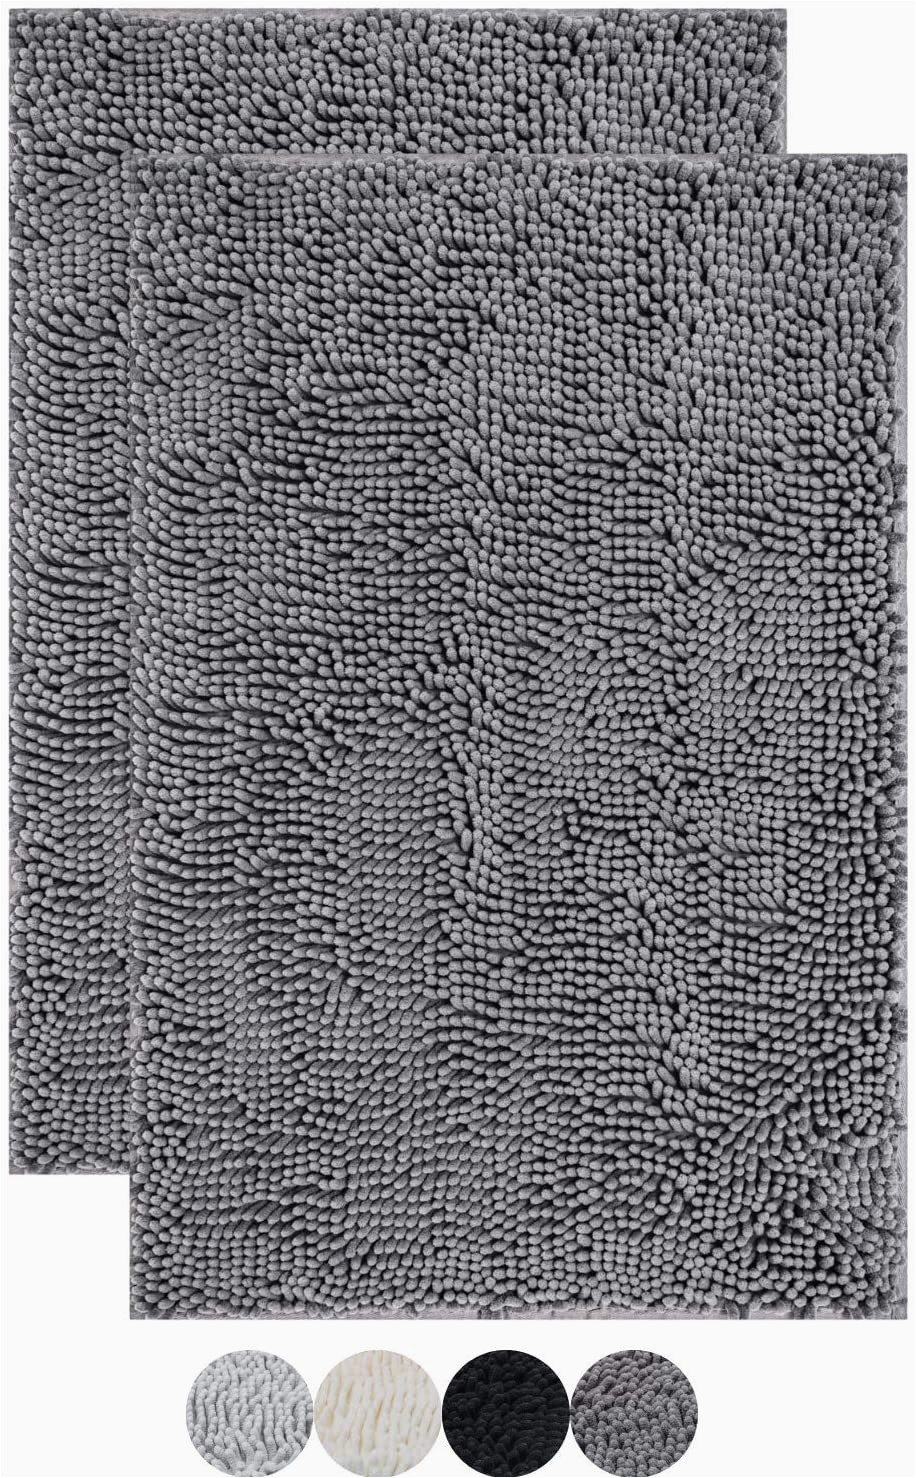 Best Washable Bathroom Rugs Enkosi Chenille Bathroom Rug Mat Extremely soft Machine Washable Best Carpet Mats for Tub Shower and Bath Room 2 30×20 Rectangle Dark Gray